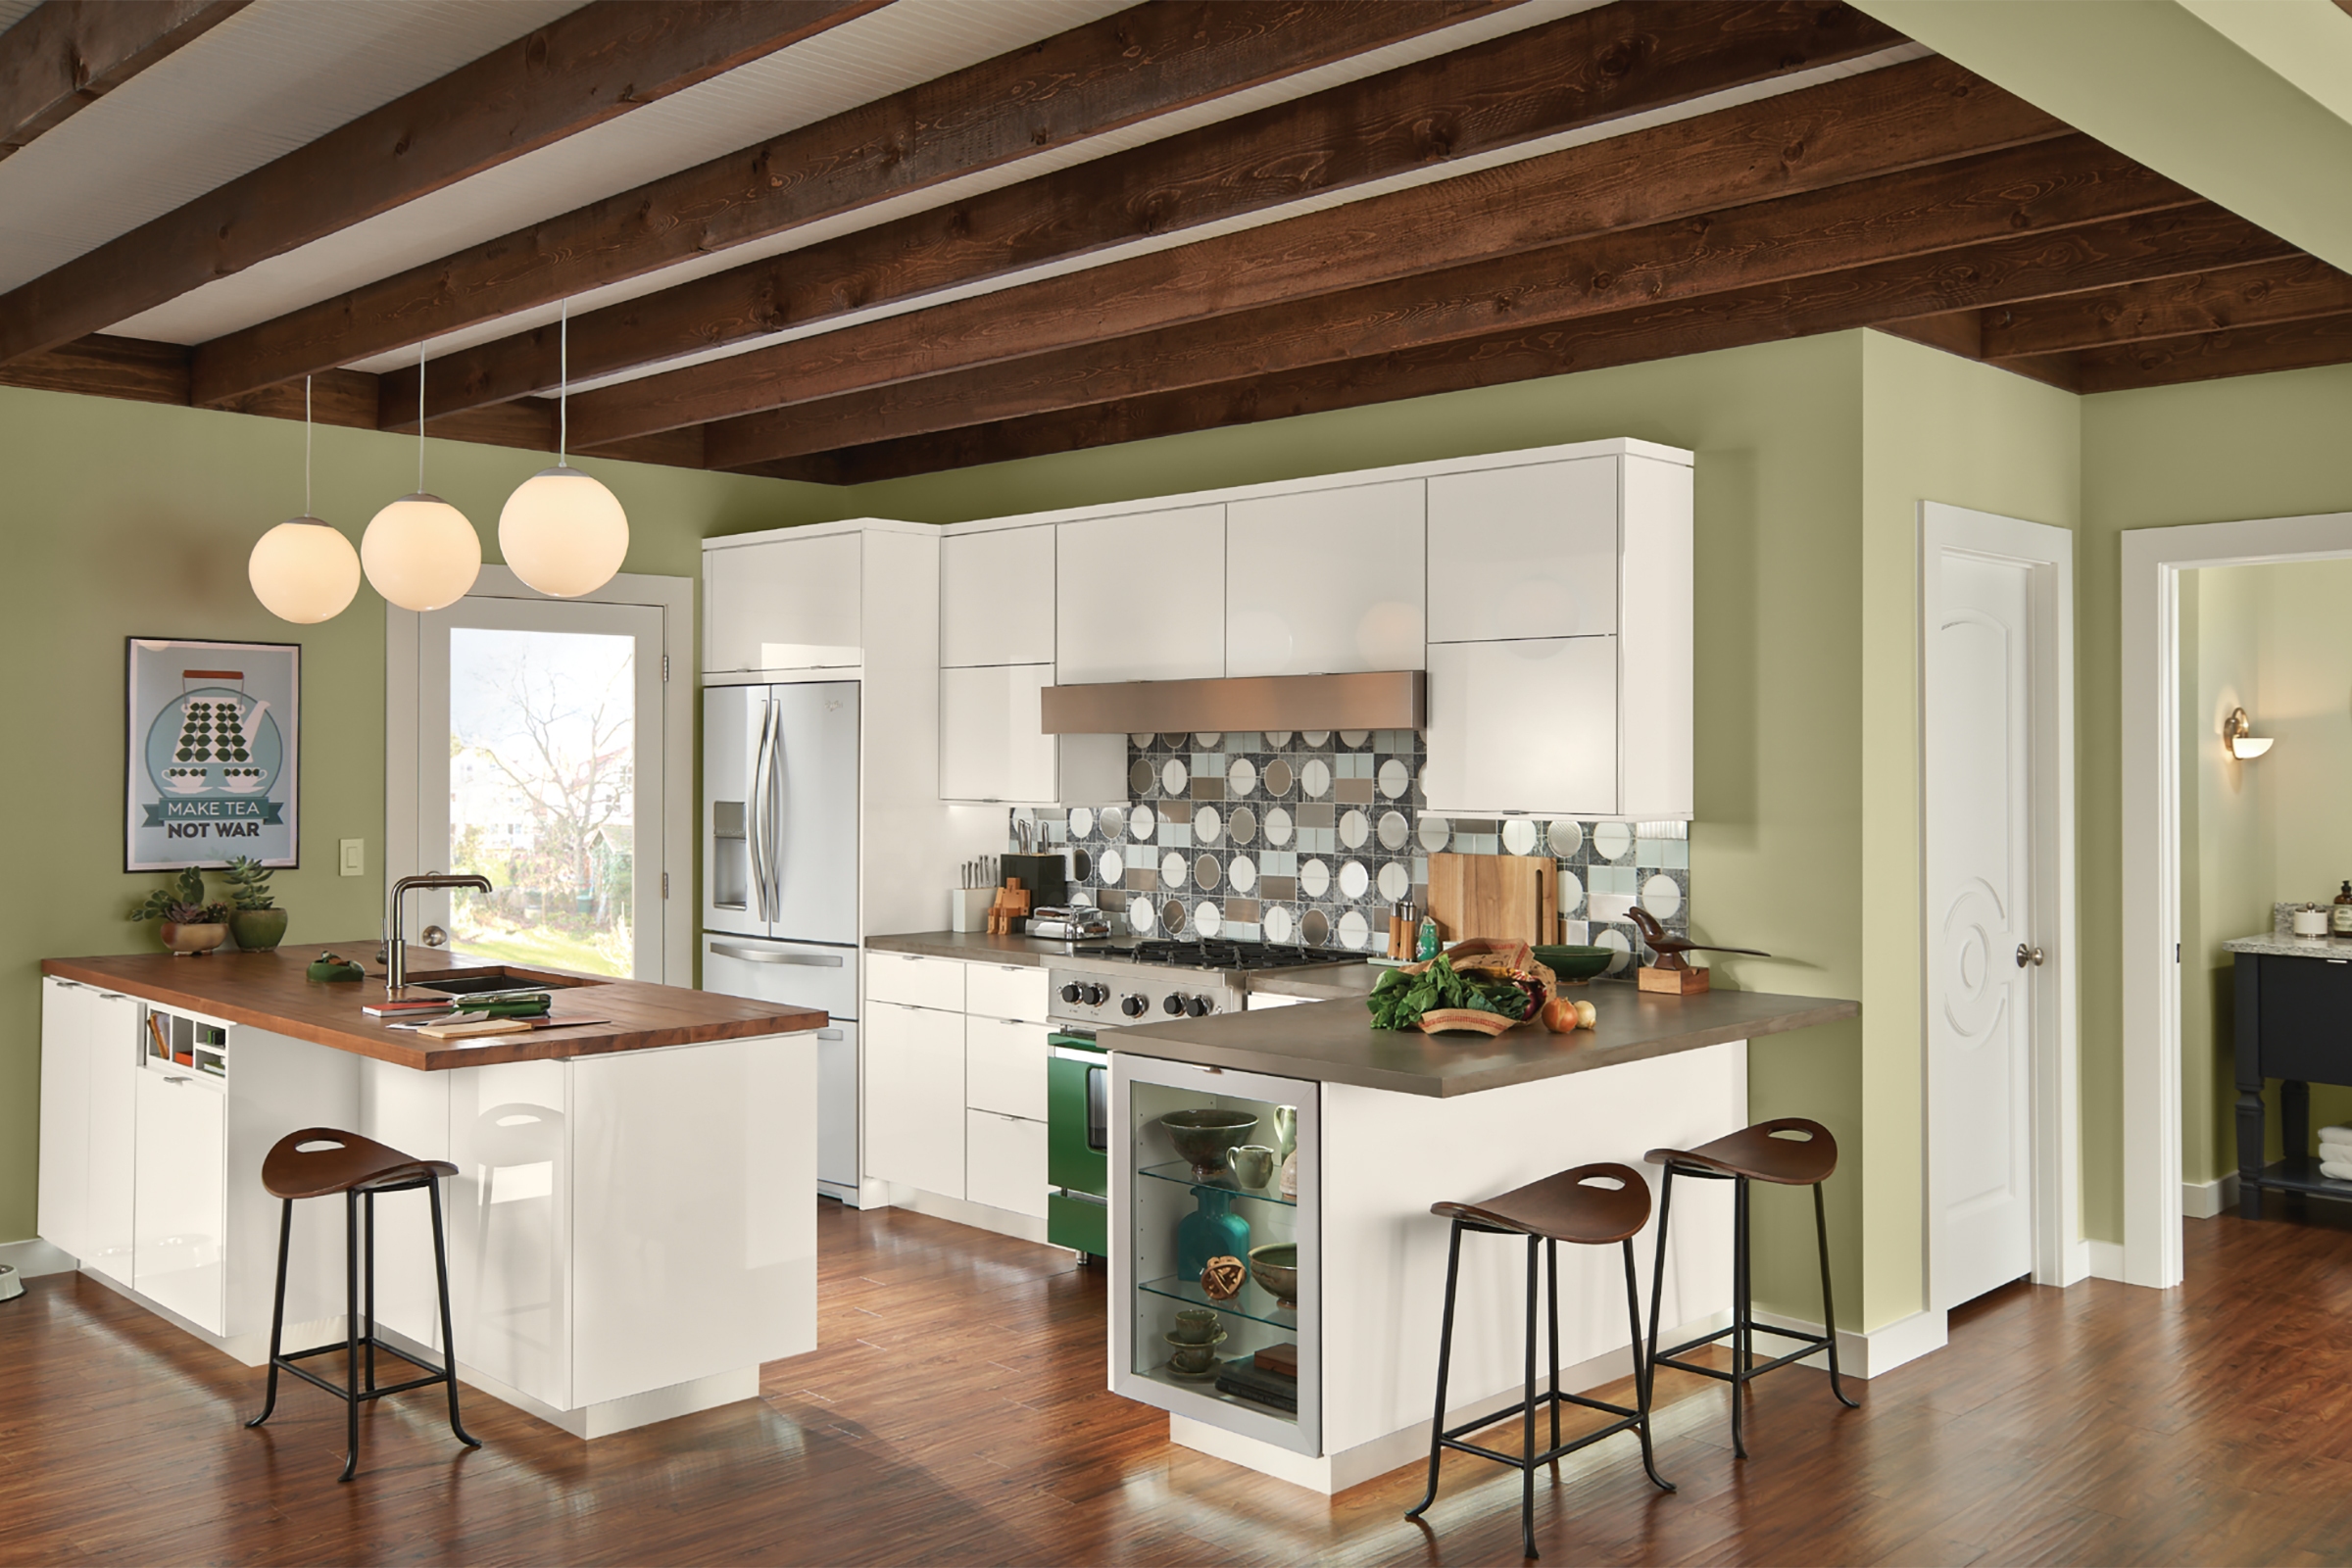 KraftMaid pistachio green kitchen accent wall with white cabinets and dark countertops